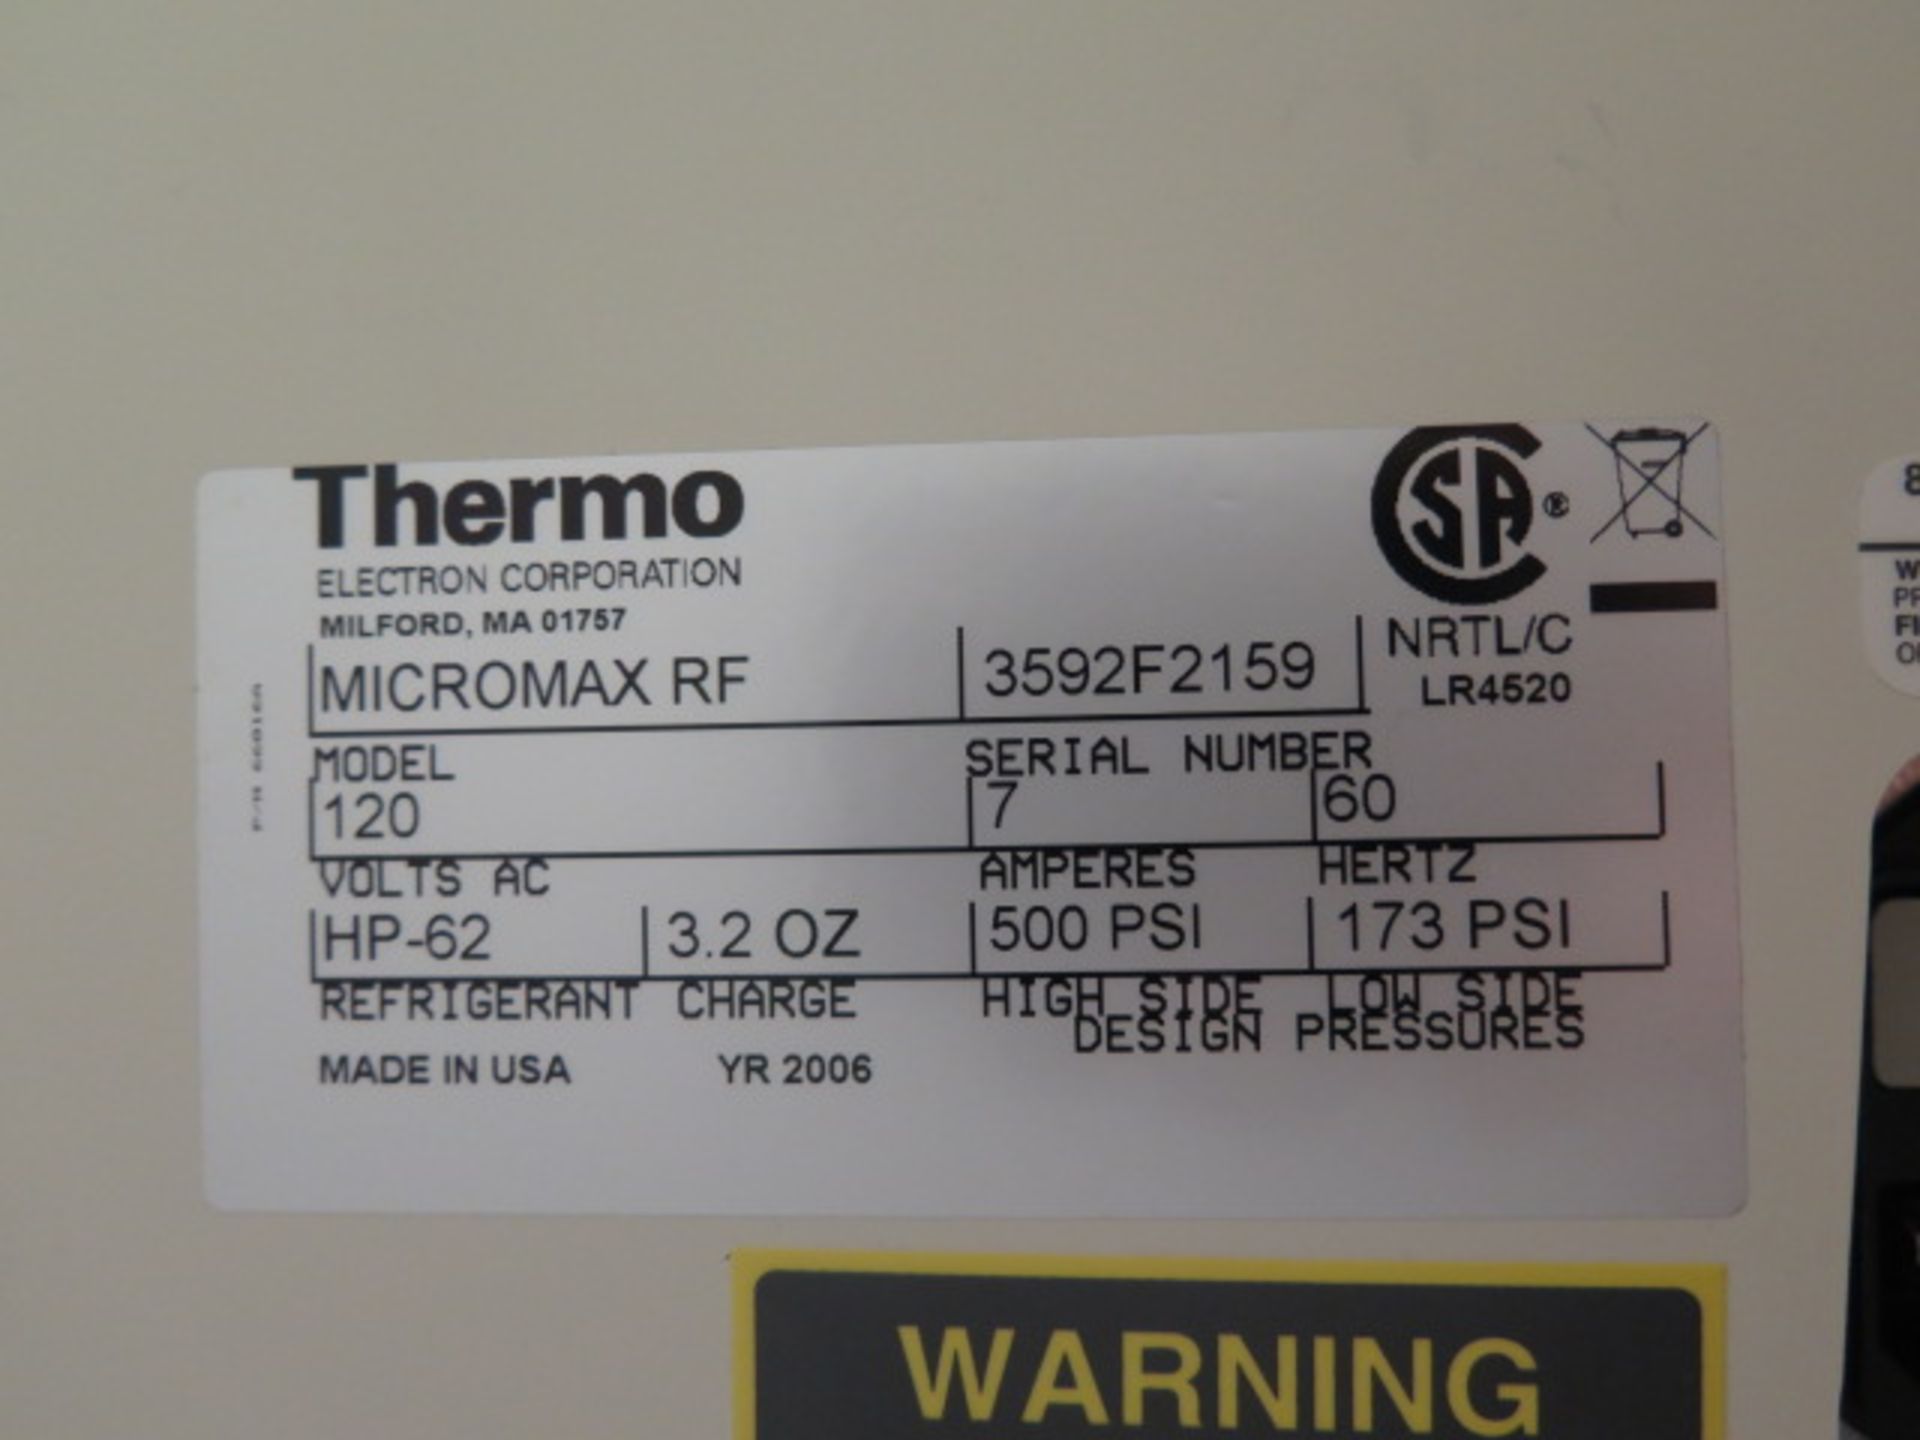 Thermo Electron "Micromax RF" mdl. 120 Refrigerated Microcentrifuge s/n 3592F2159 | Loading - Image 5 of 5